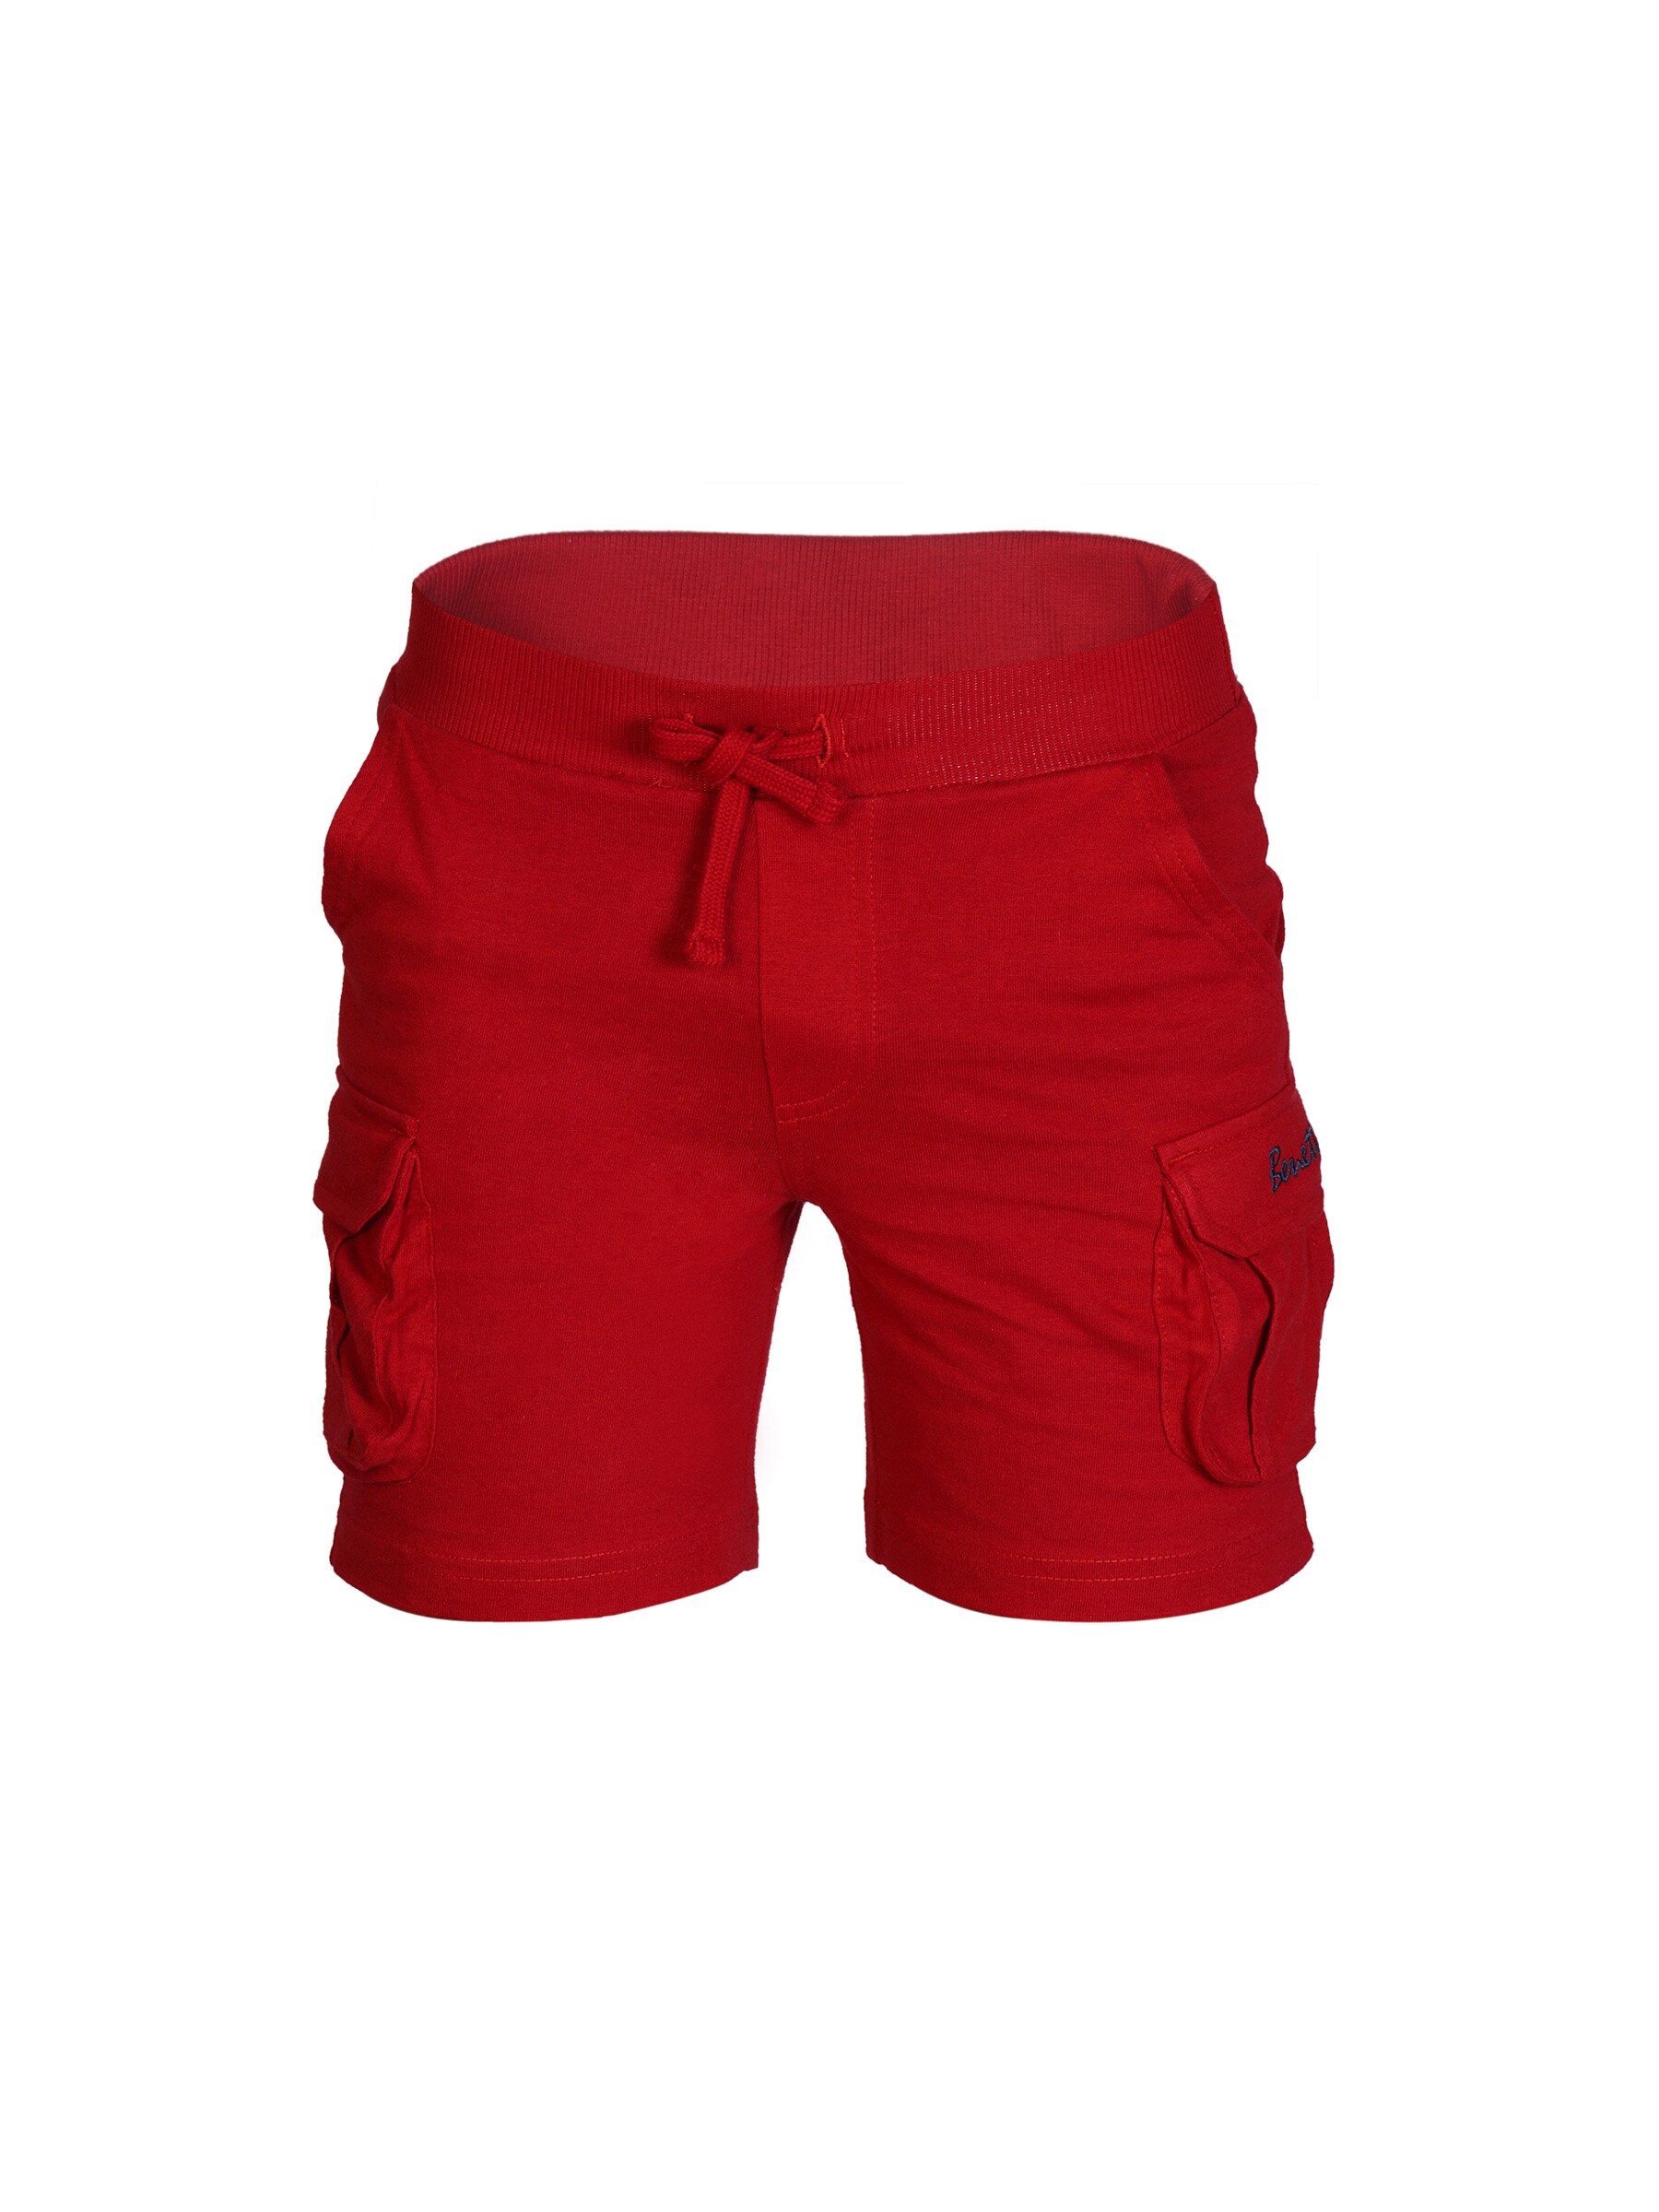 United Colors of Benetton Boys Knitted shorts